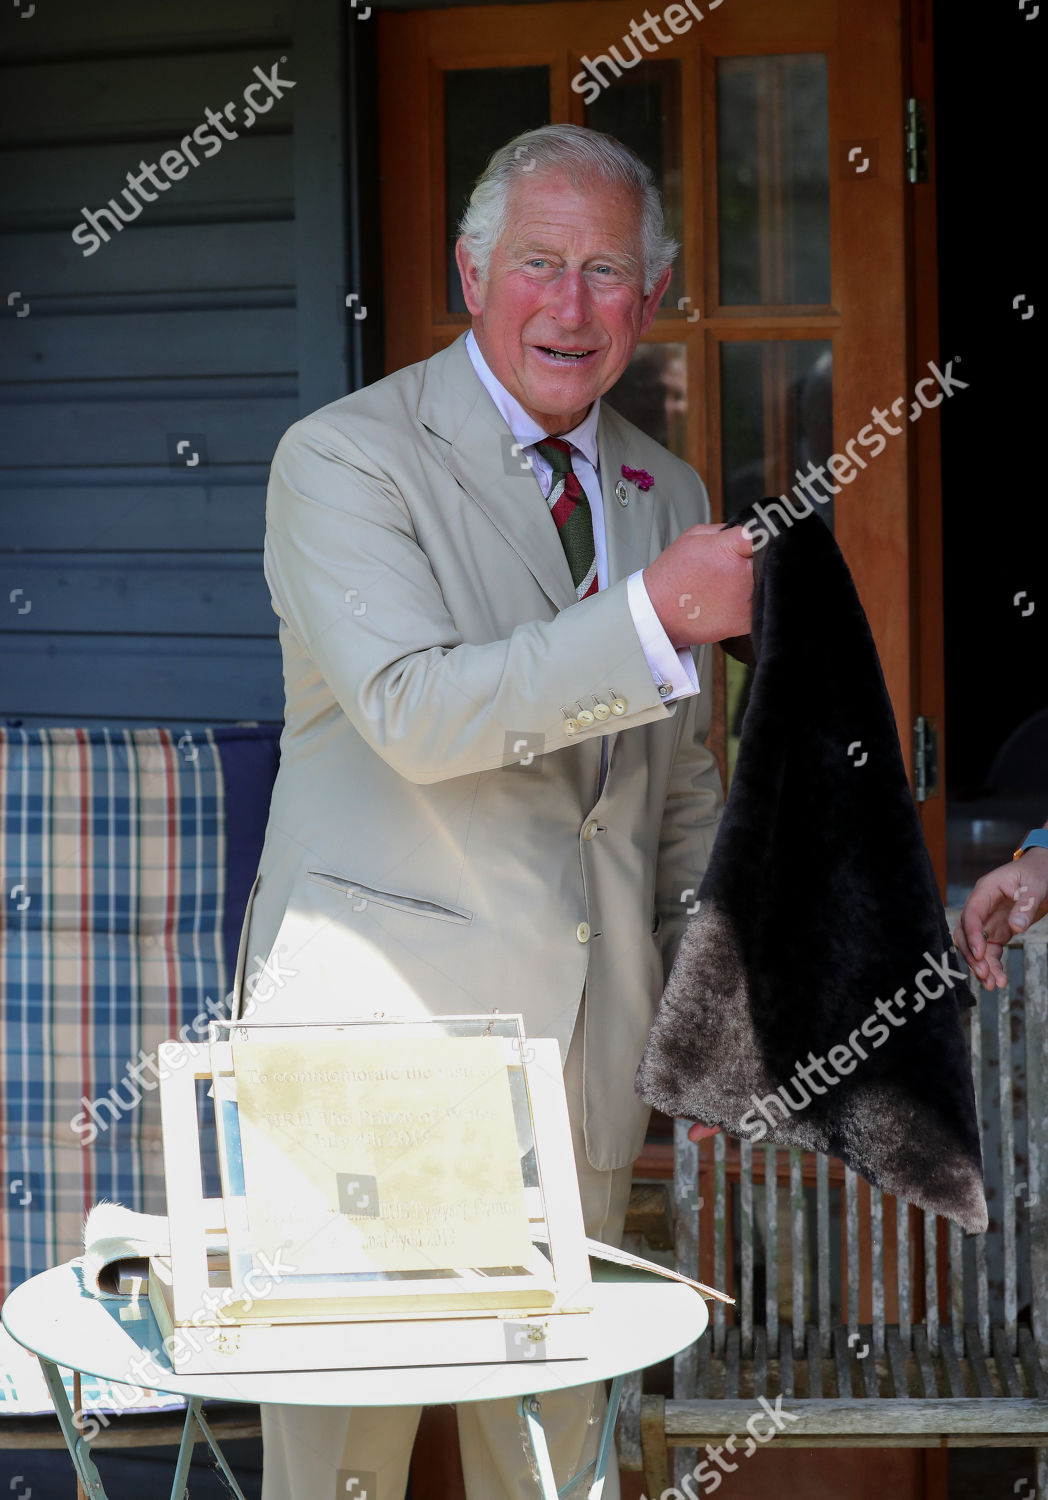 prince-charles-and-camilla-duchess-of-cornwall-visit-to-wales-uk-shutterstock-editorial-10327976am.jpg